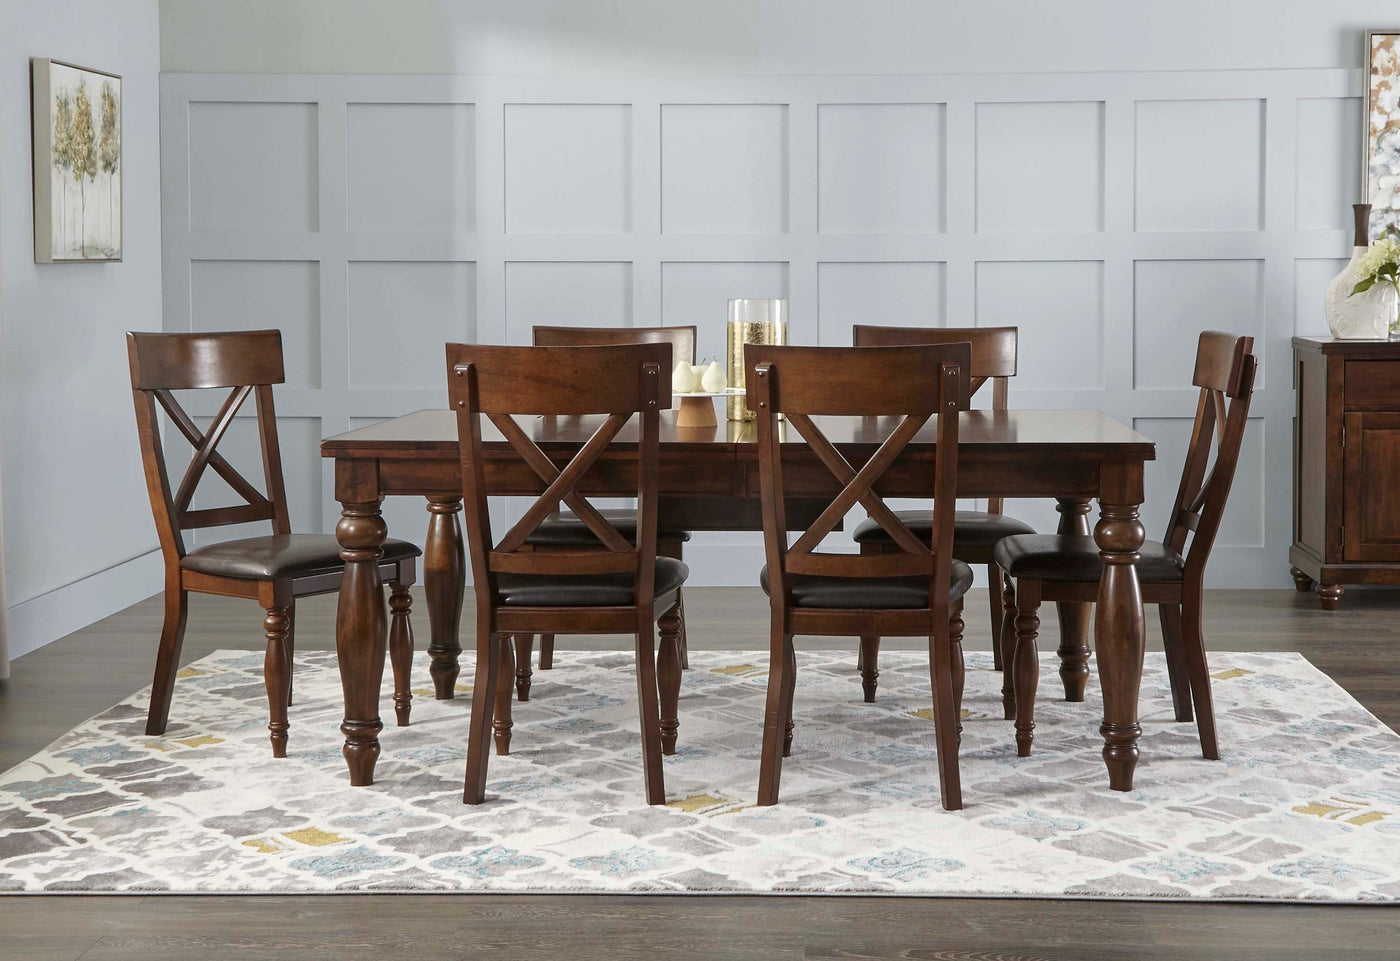 Kingstown 7-Piece Extendable Dining Set - Chocolate